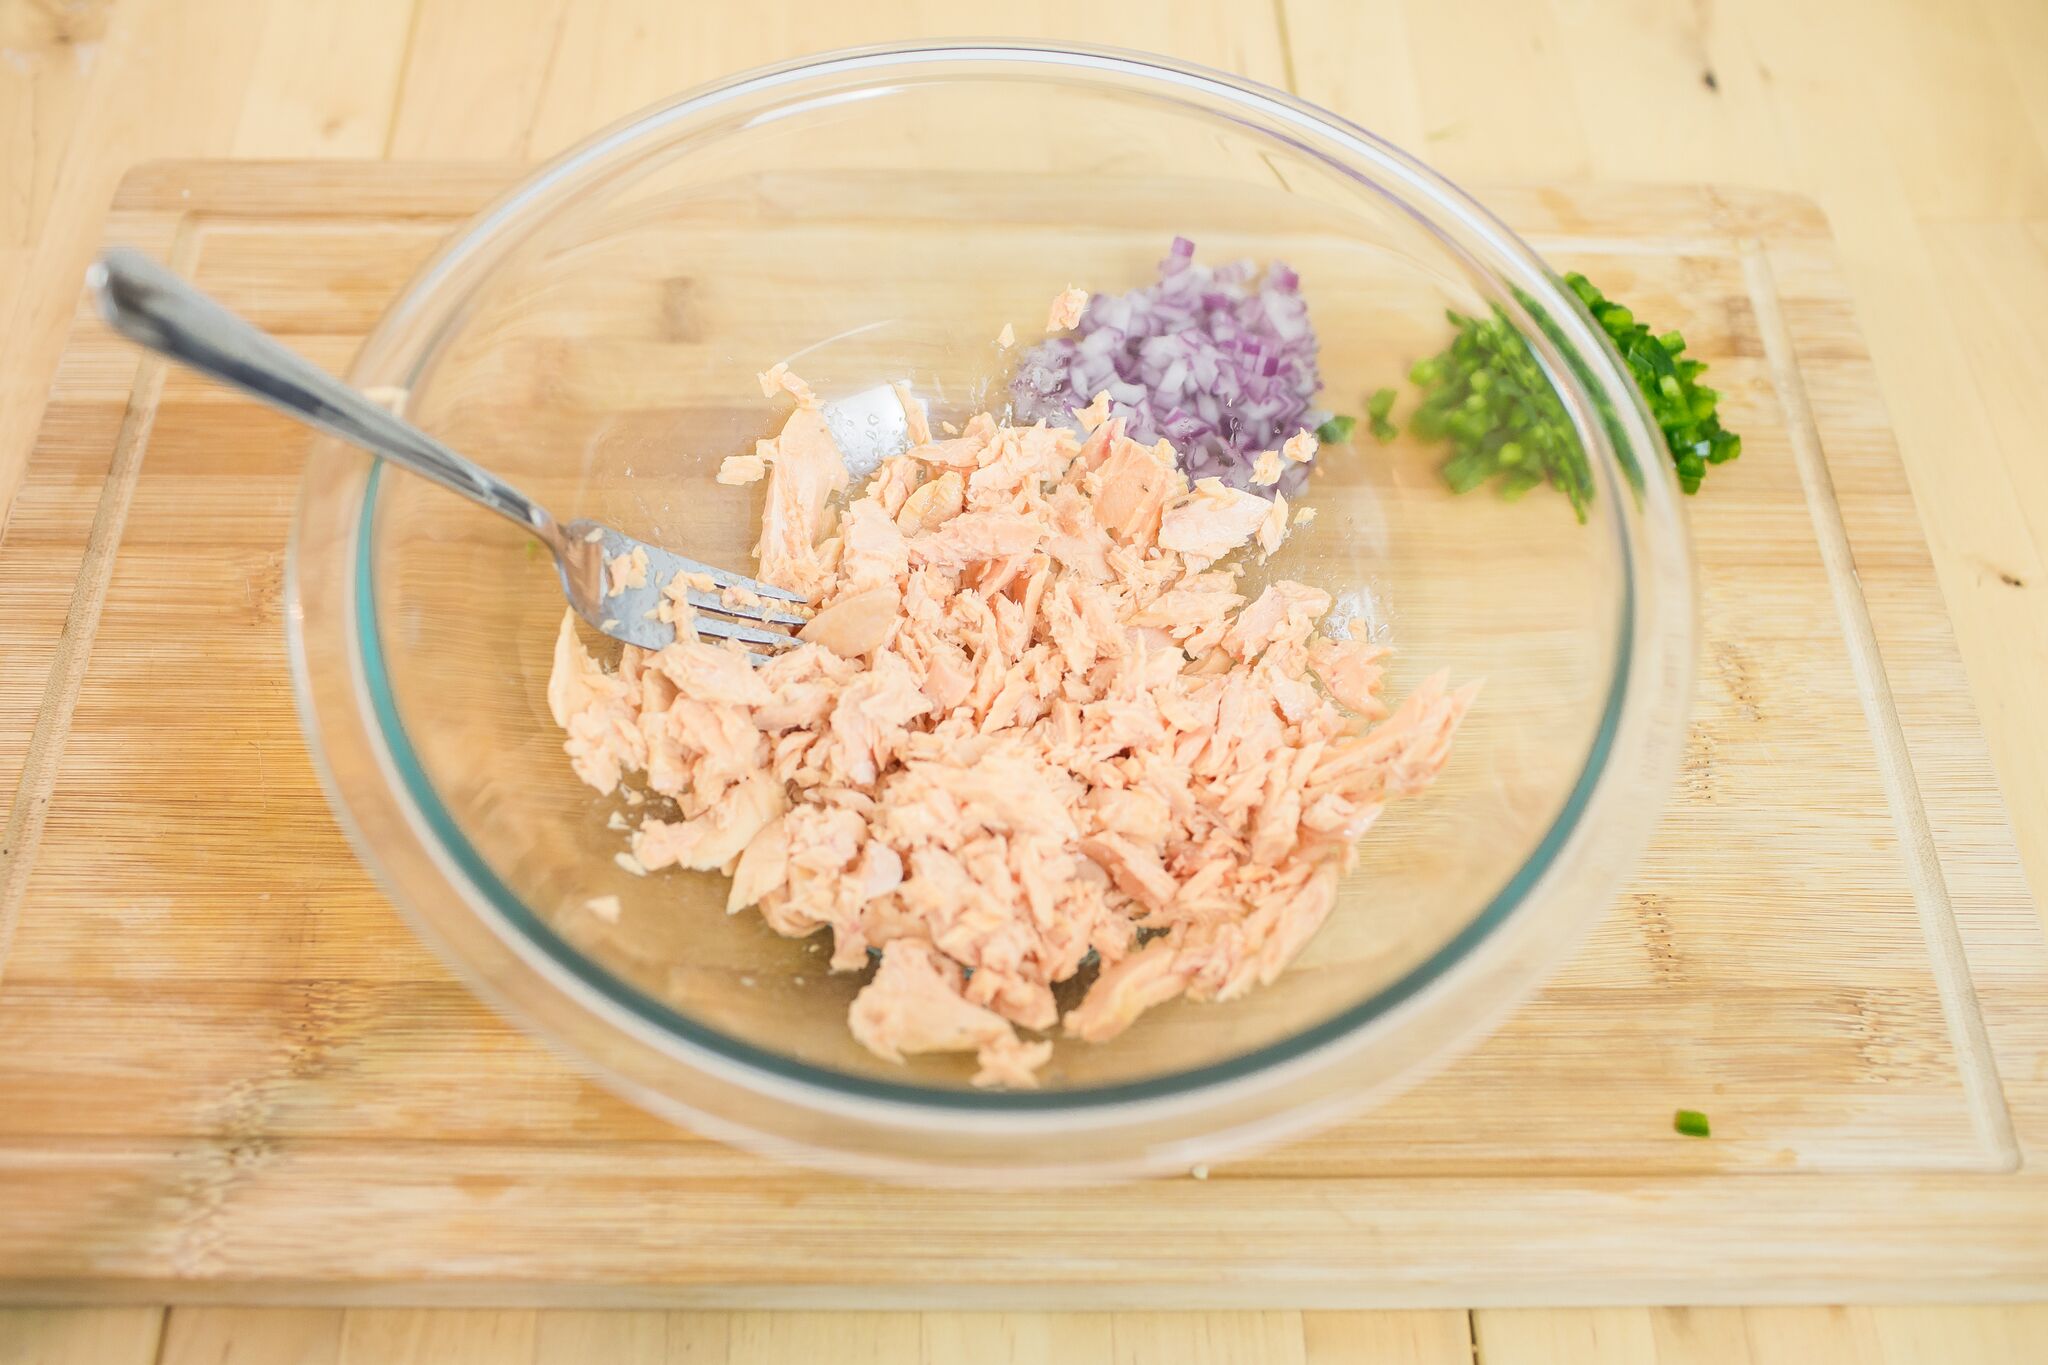 In a large bowl, break up smoked salmon with a fork.